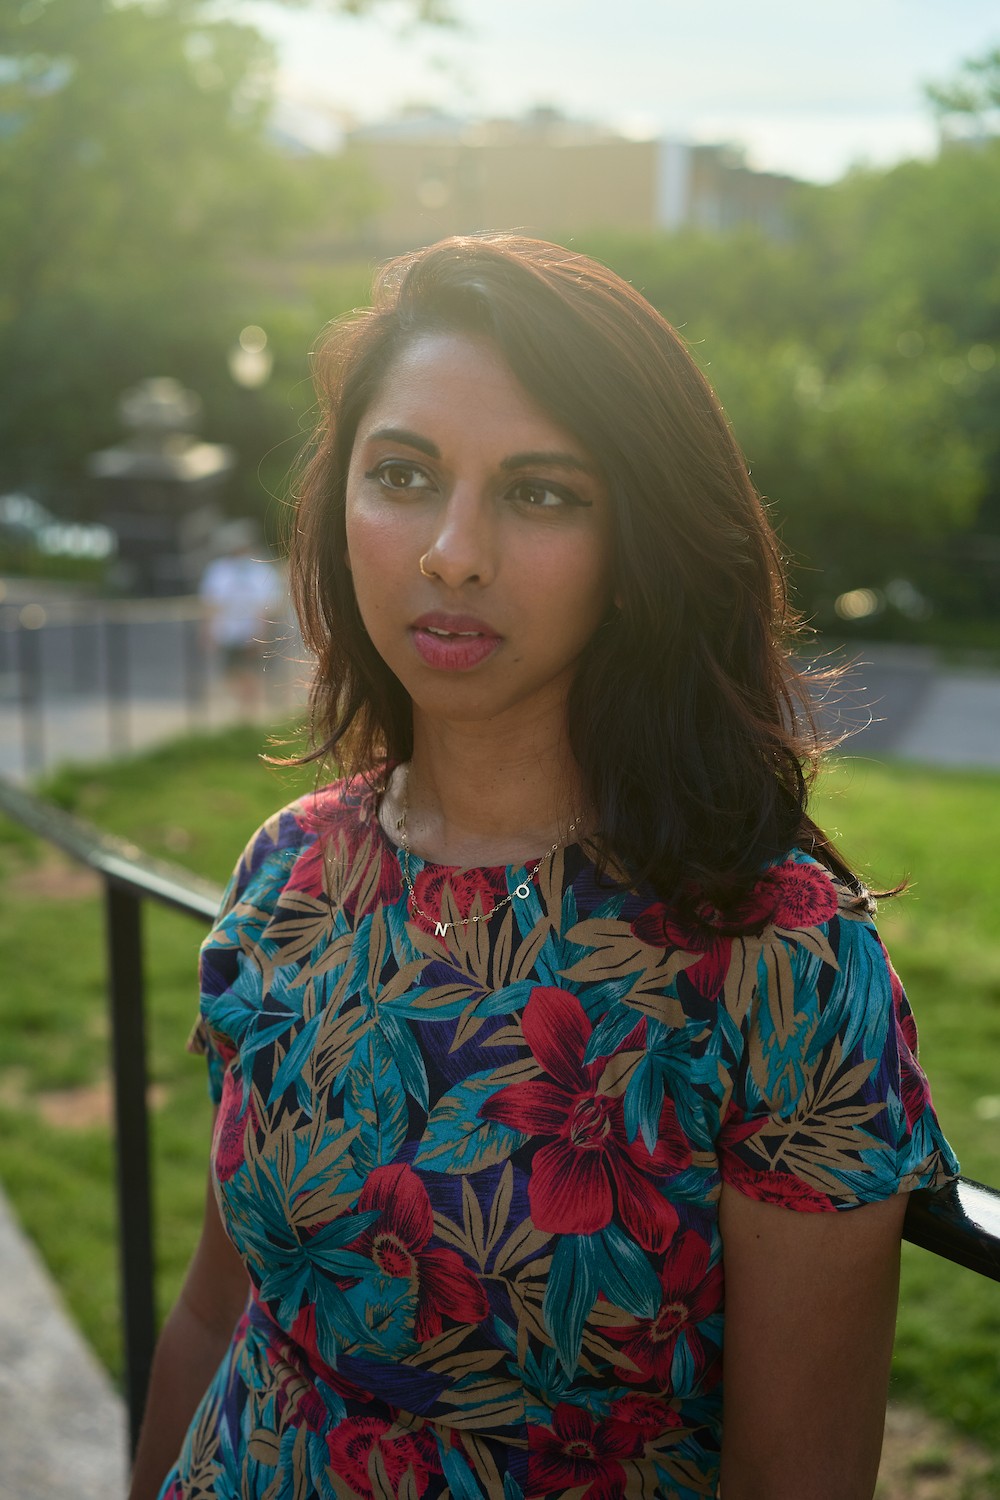 Amirtha Kidambi is featured centered in a portrait-formatted photograph, looking off to the left side of the photograph. She is wearing a floral dress and has shoulder-length hair. Behind her is a grassy landscape resembling a park. The photograph is suffuse with bright sun.